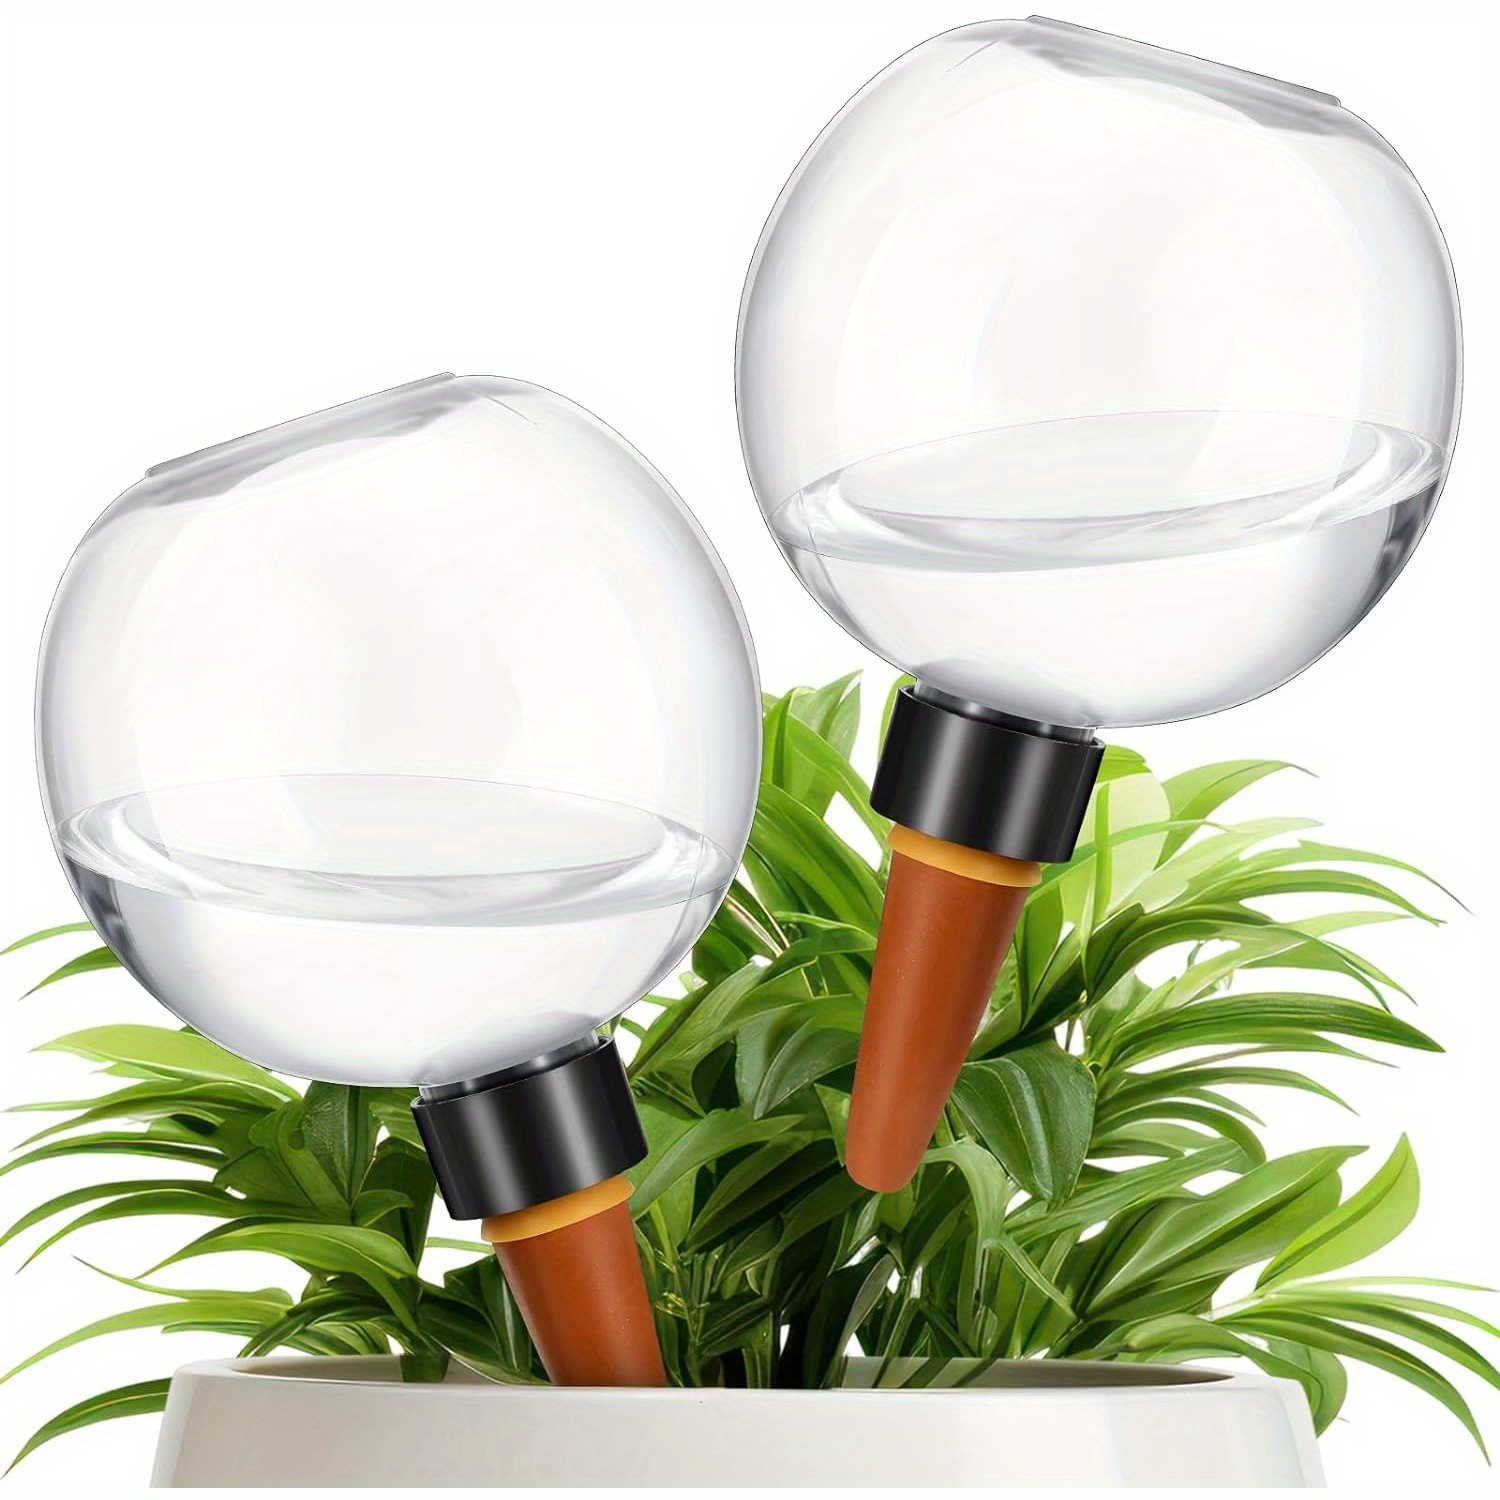 

1/2 Pcs Watering Globes Automatic Plastic Self Watering Planter Insert Waterer Watering Bulbs 17 Oz For Indoor Plants Drip Irrigation Plant Watering Devices With Slow Release Control For Garden